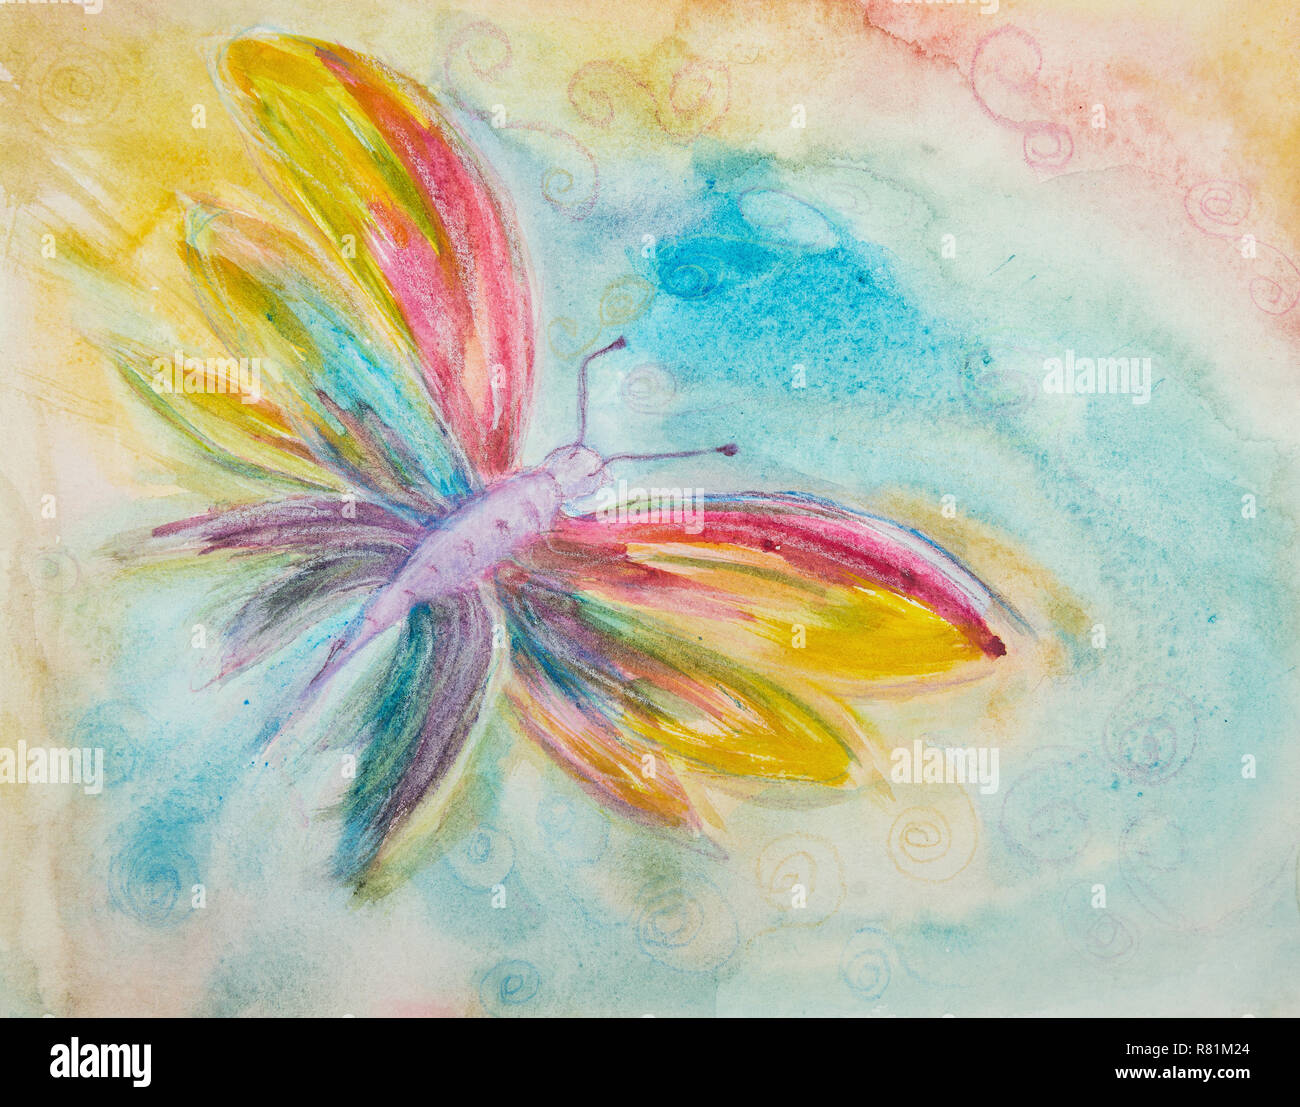 Colorful butterfly in a curly sky. The dabbing technique near the edges gives a soft focus effect due to the altered surface roughness of the paper. Stock Photo